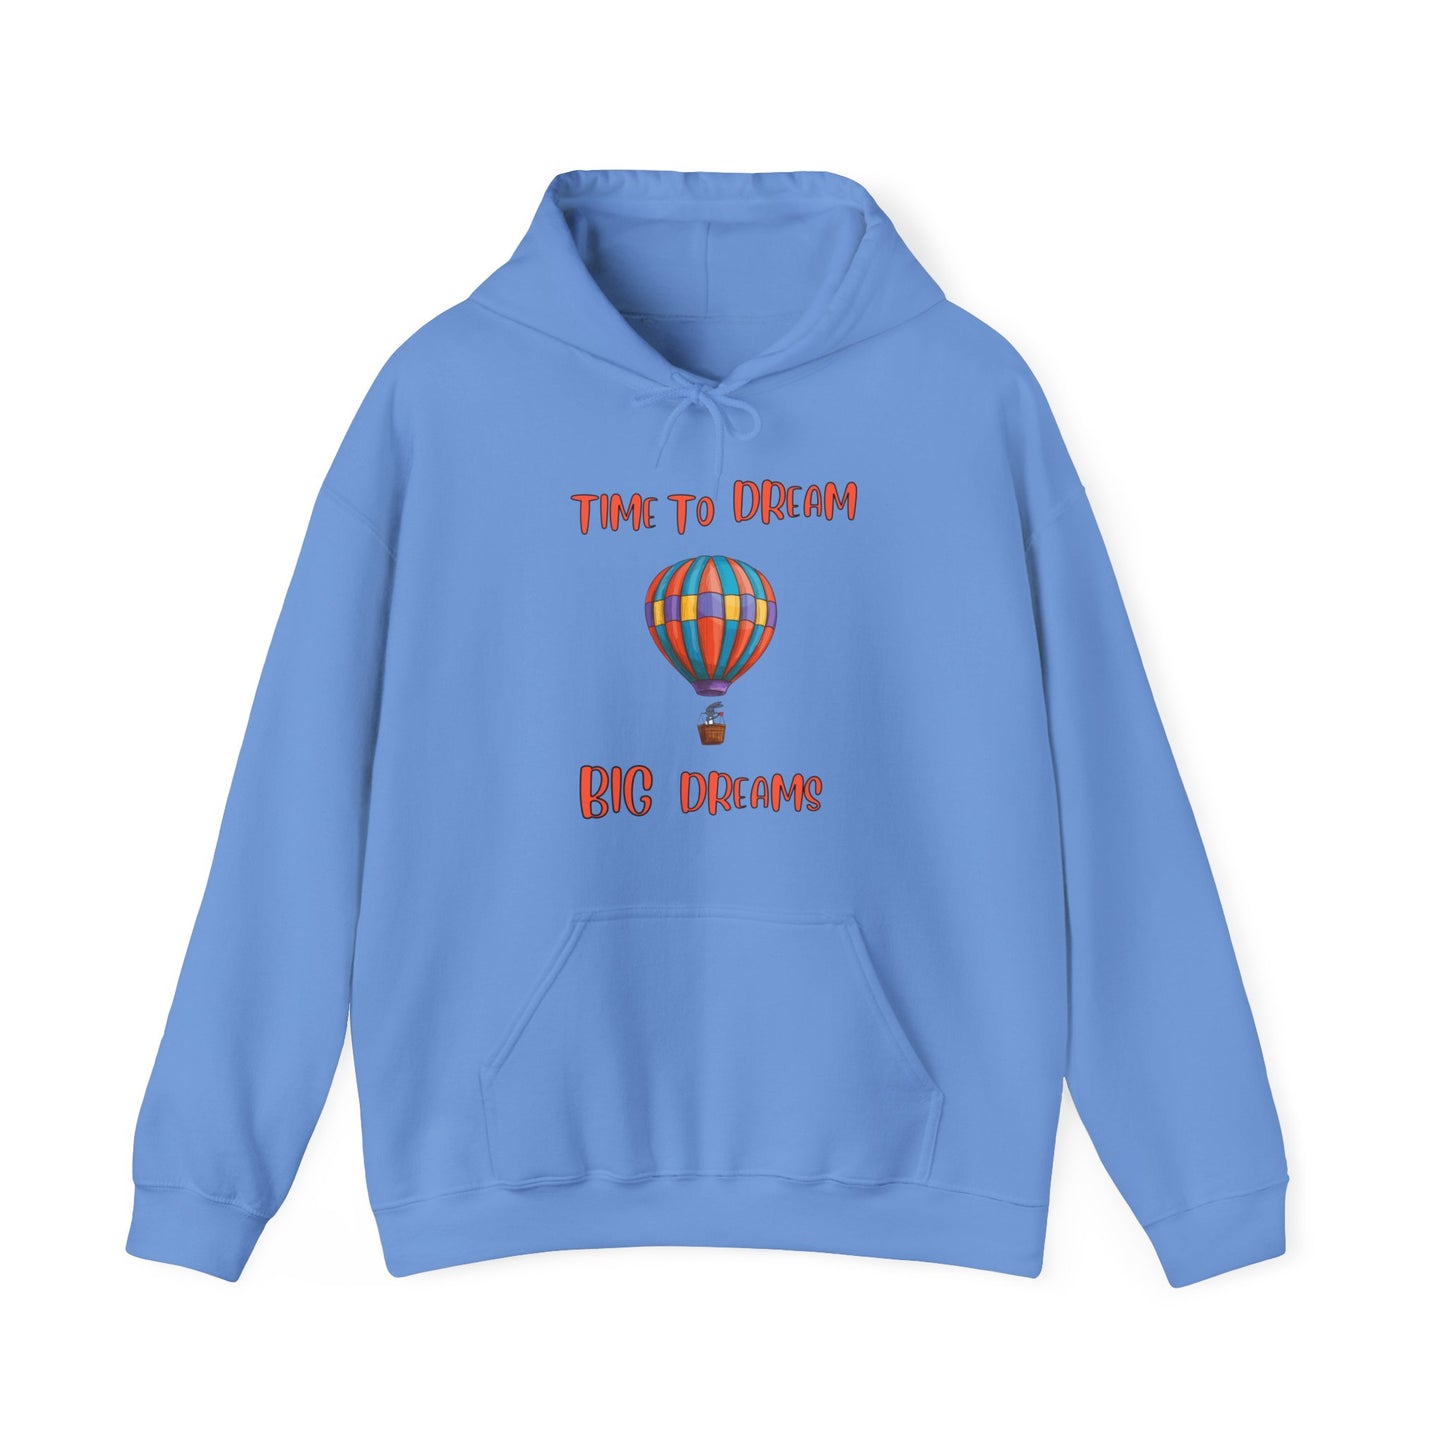 Time To Dream Big dreams. Unisex Hooded Sweat Shirt.